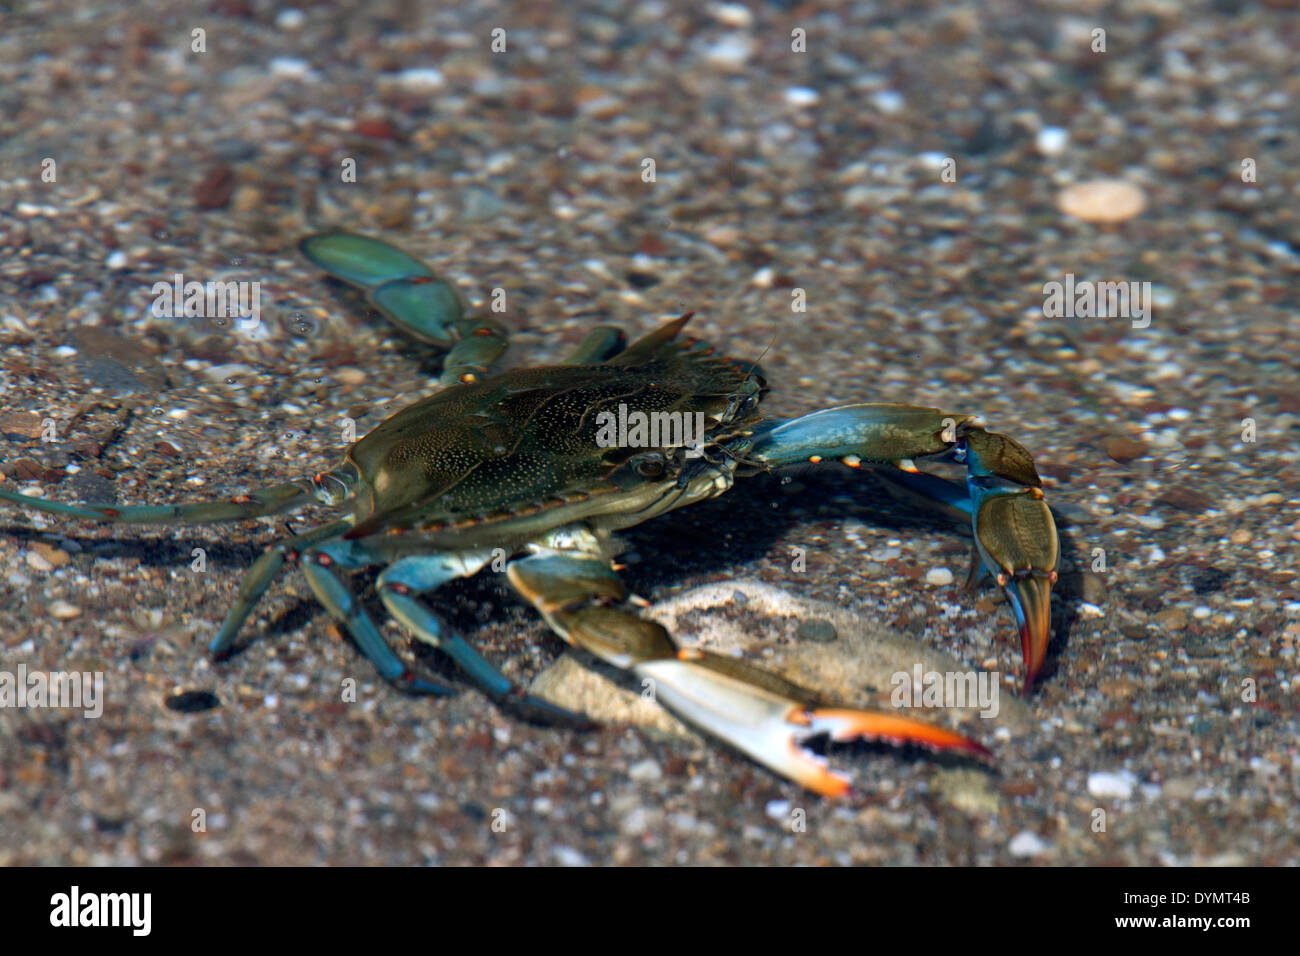 A Blue Crab, an introduced or alien species in the Mediterranean from America, Manavgat, Turkey. Stock Photo